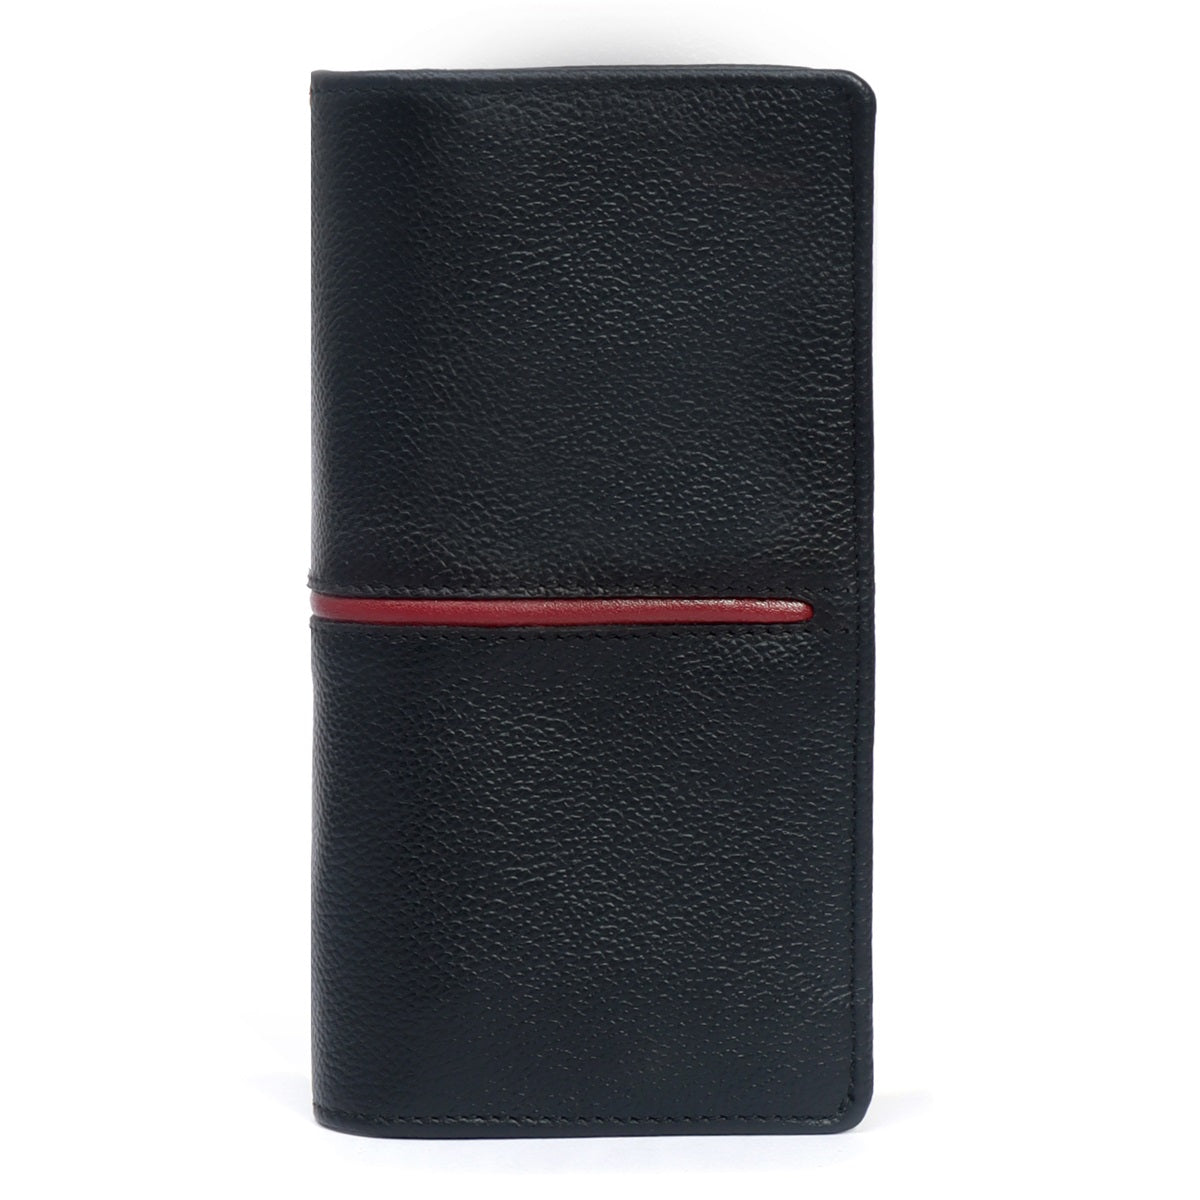 Black Textured Leather Wallet with Long Zip Compartment